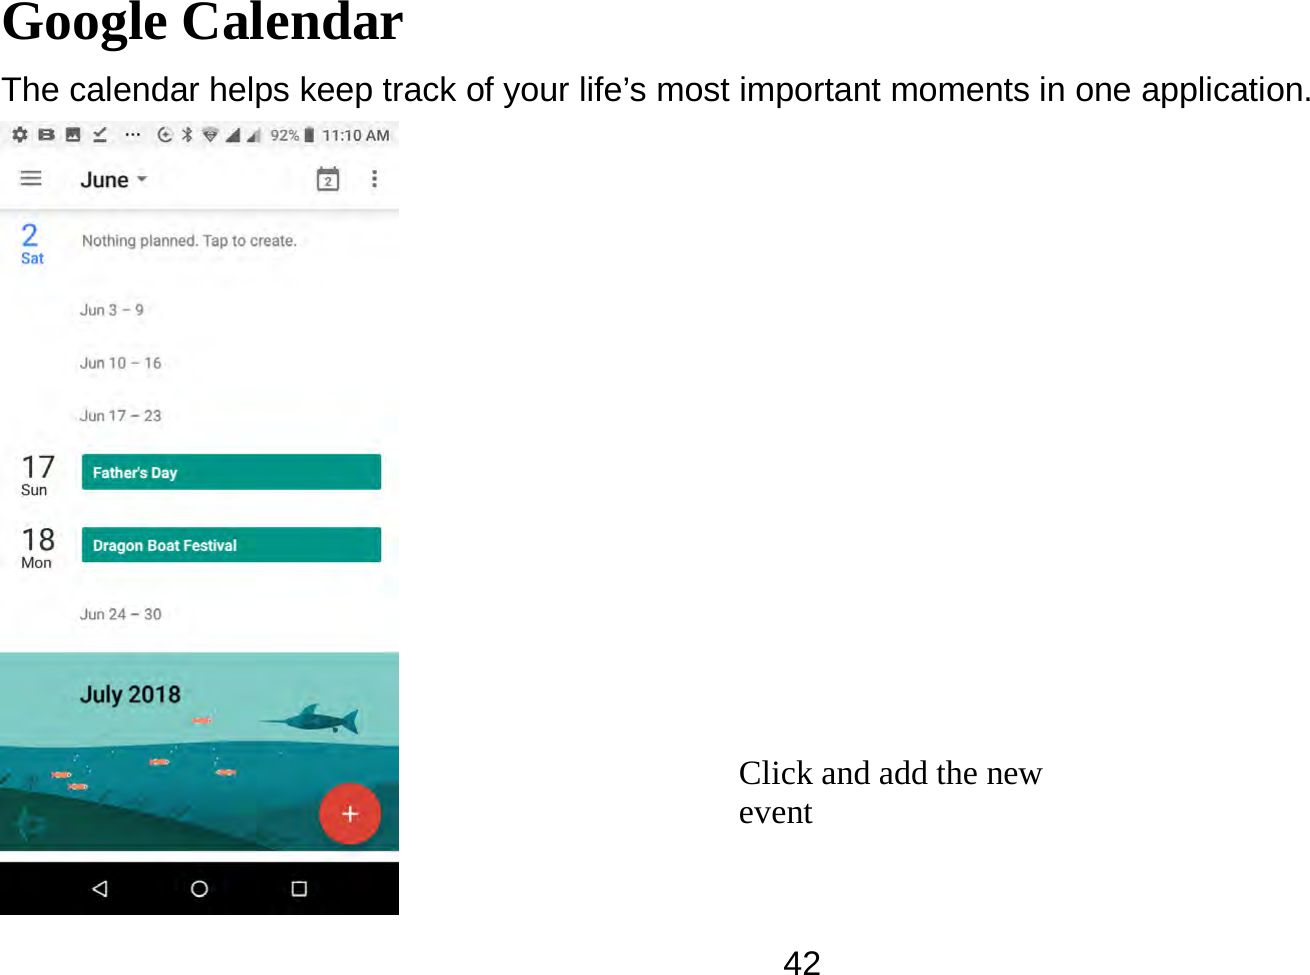   42Google Calendar The calendar helps keep track of your life’s most important moments in one application.    Click and add the new event   